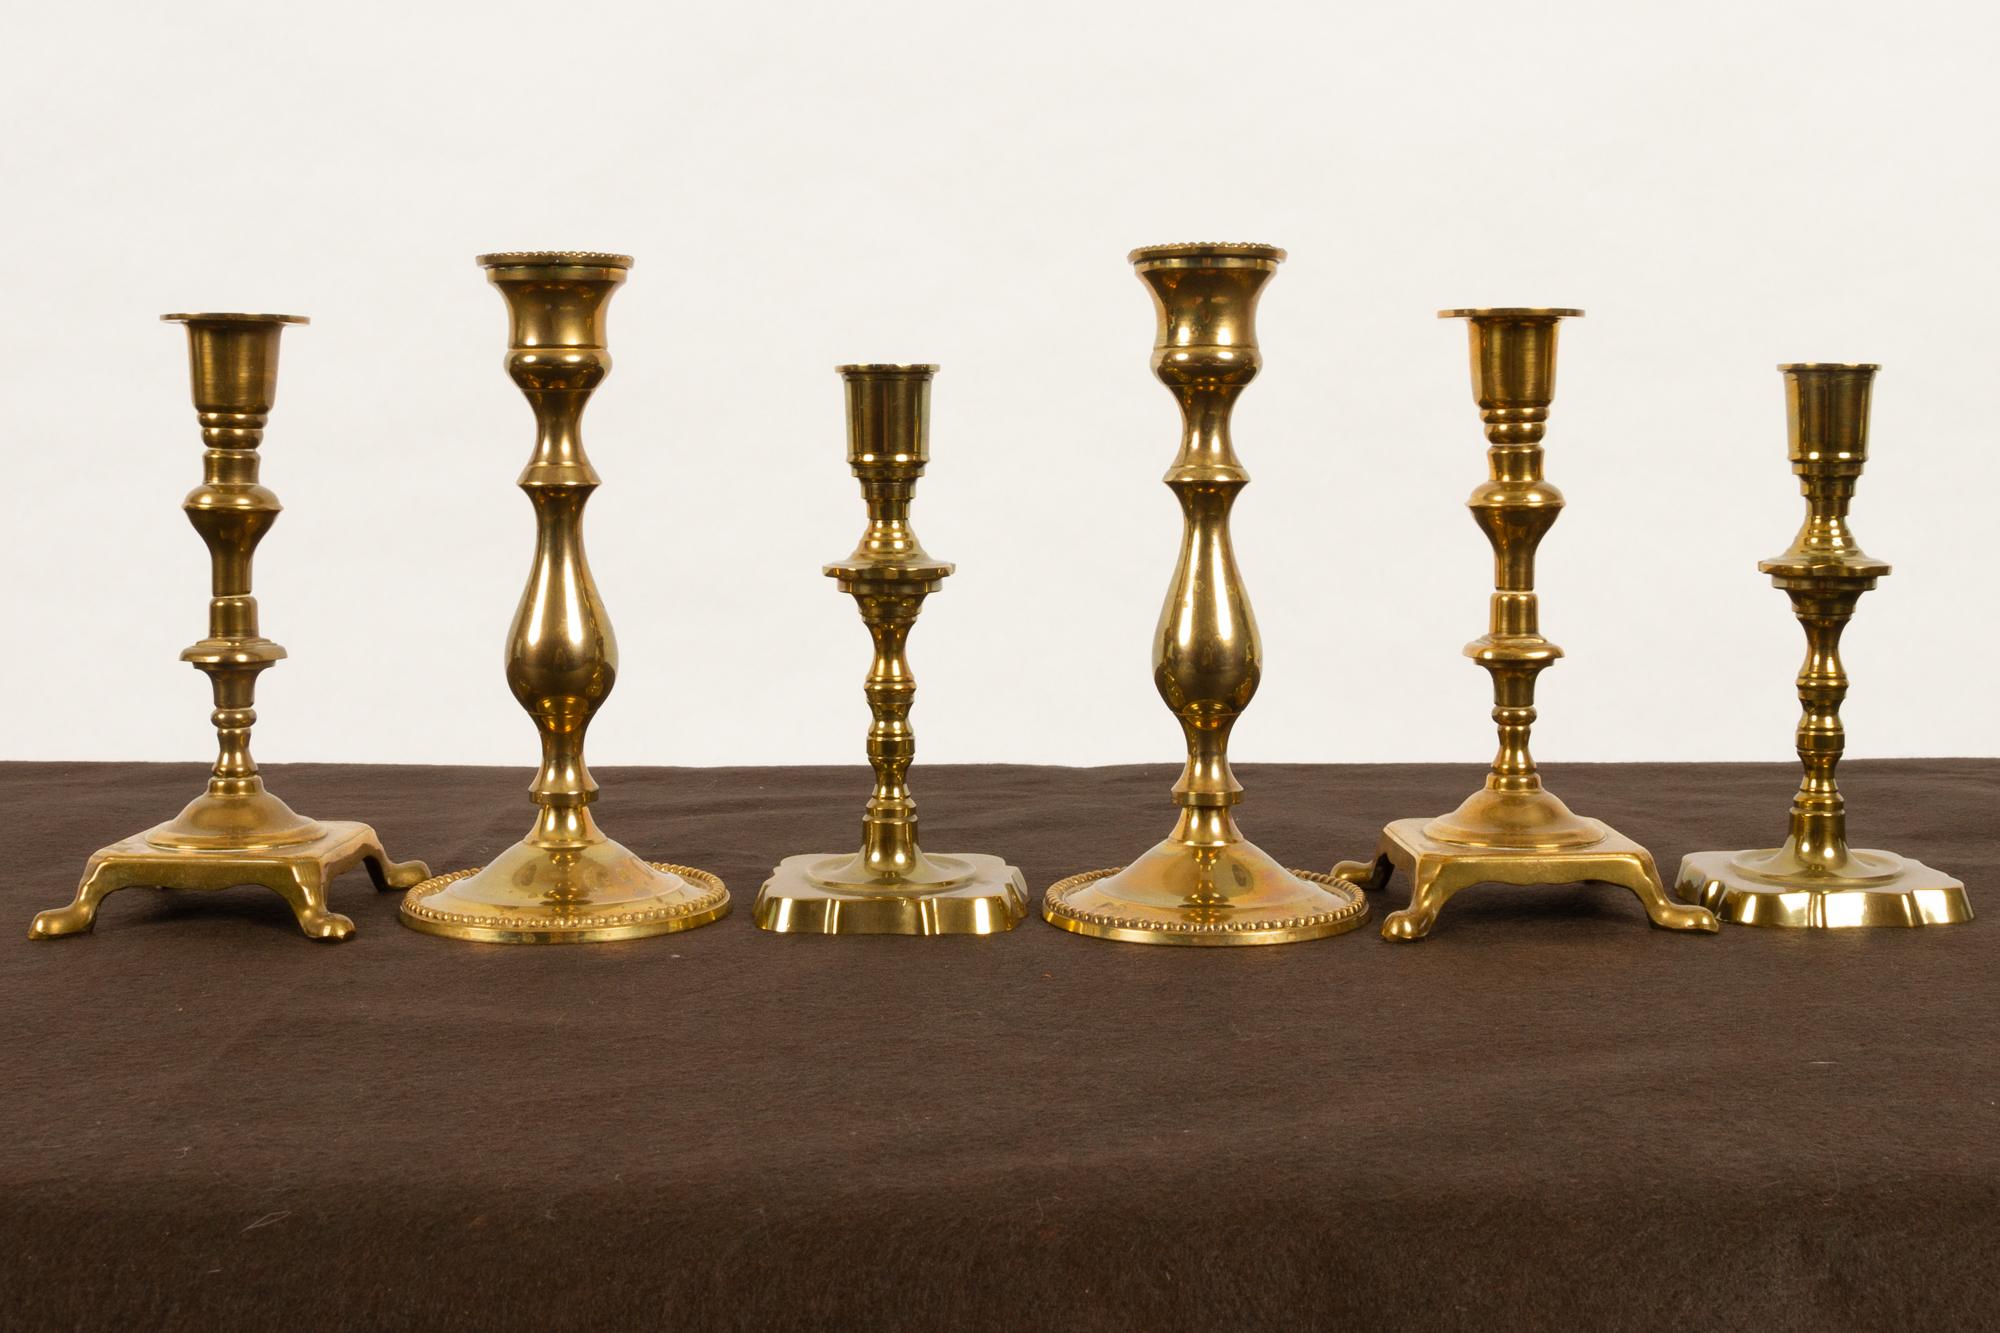 Brass candleholders from late 19th century, set of 6.
Three pairs of antique candlesticks in solid brass.
Good condition.